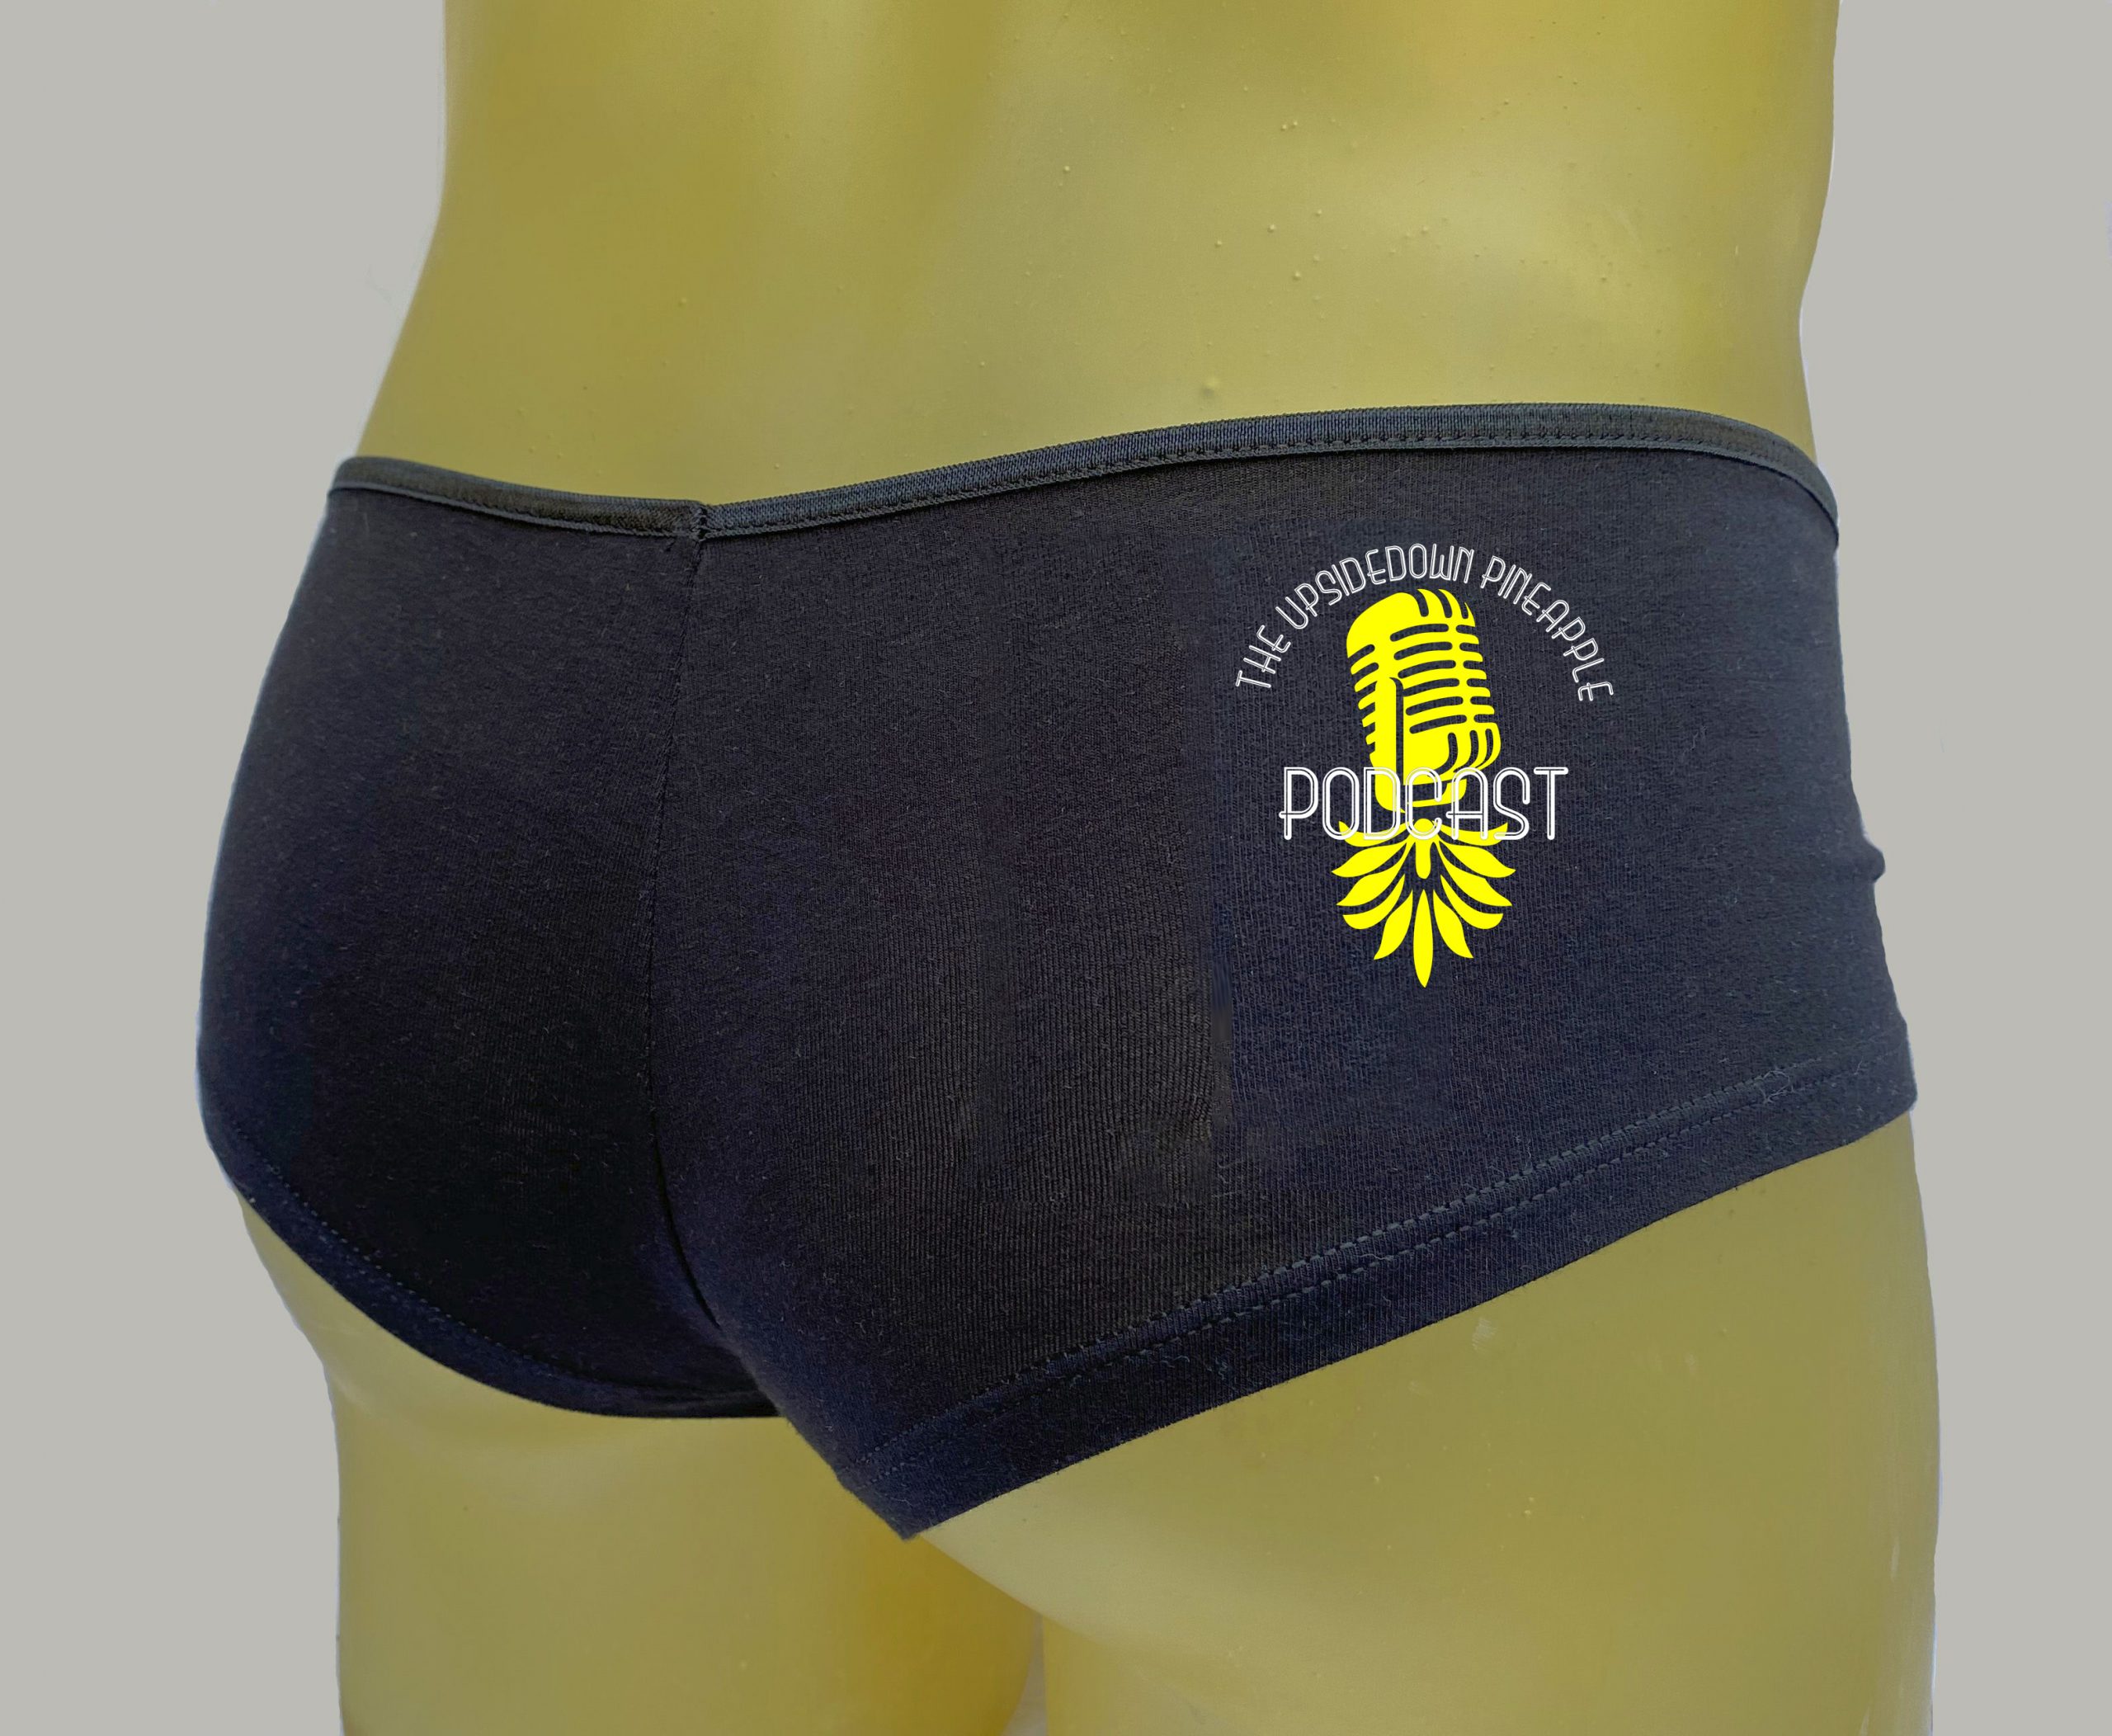 The Upsidedown Pineapple Podcast Black Plus Size Booty Shorts